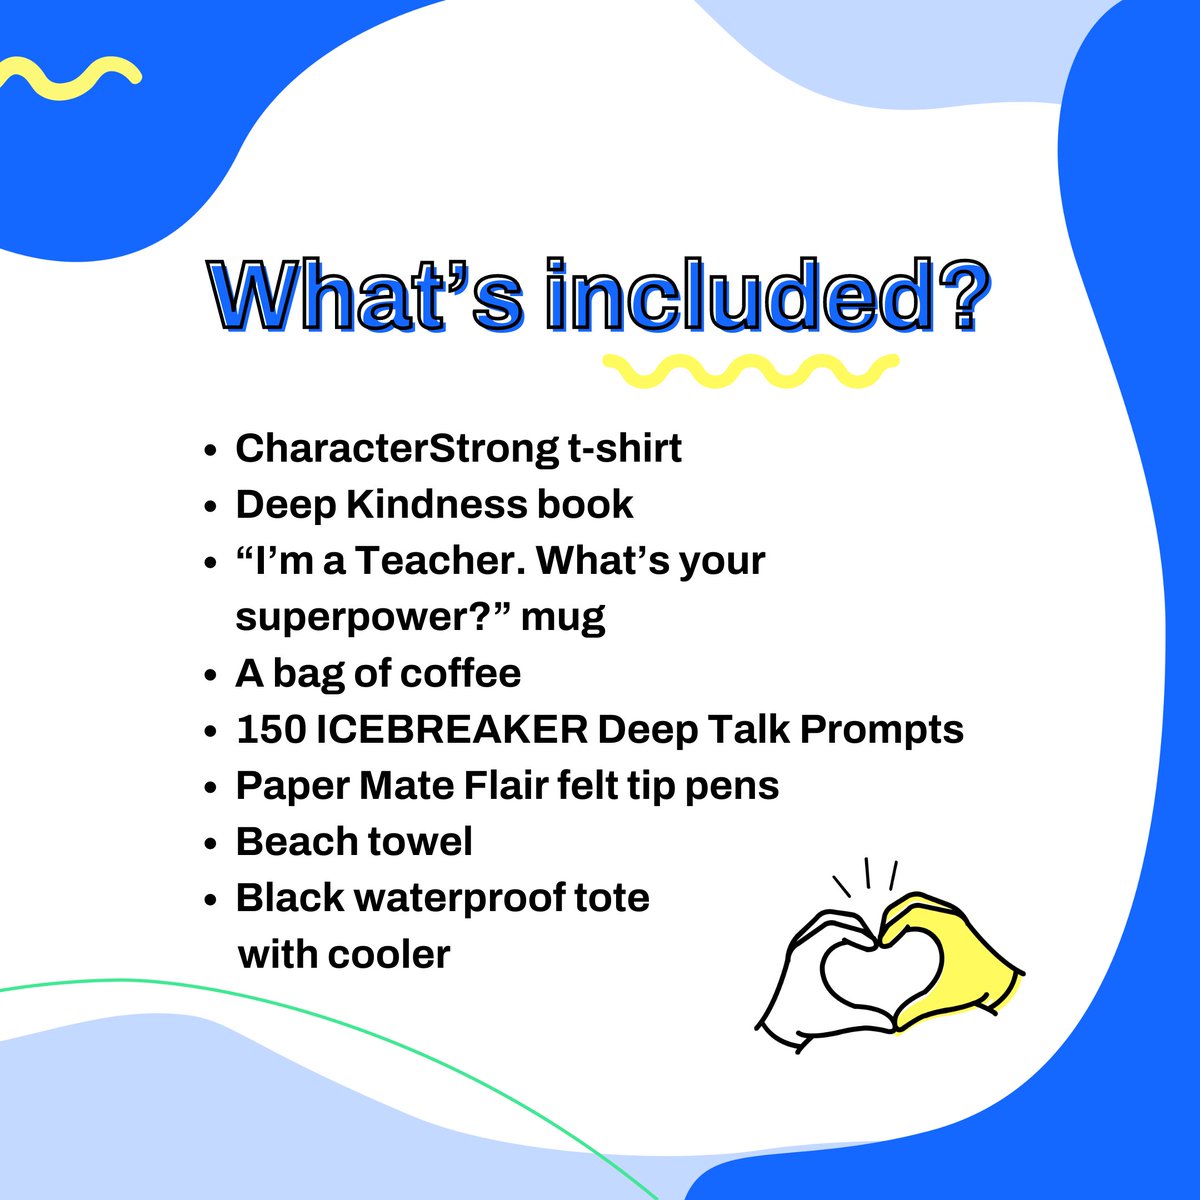 GIVEAWAY!🎉In celebration of #TeacherAppreciationWeek we are giving away a CharacterStrong basket of goodies! 1. Follow @CharacterStrong 2. Like this tweet 3. Tag teacher friends in the thread below! Each person tagged counts as an extra entry!